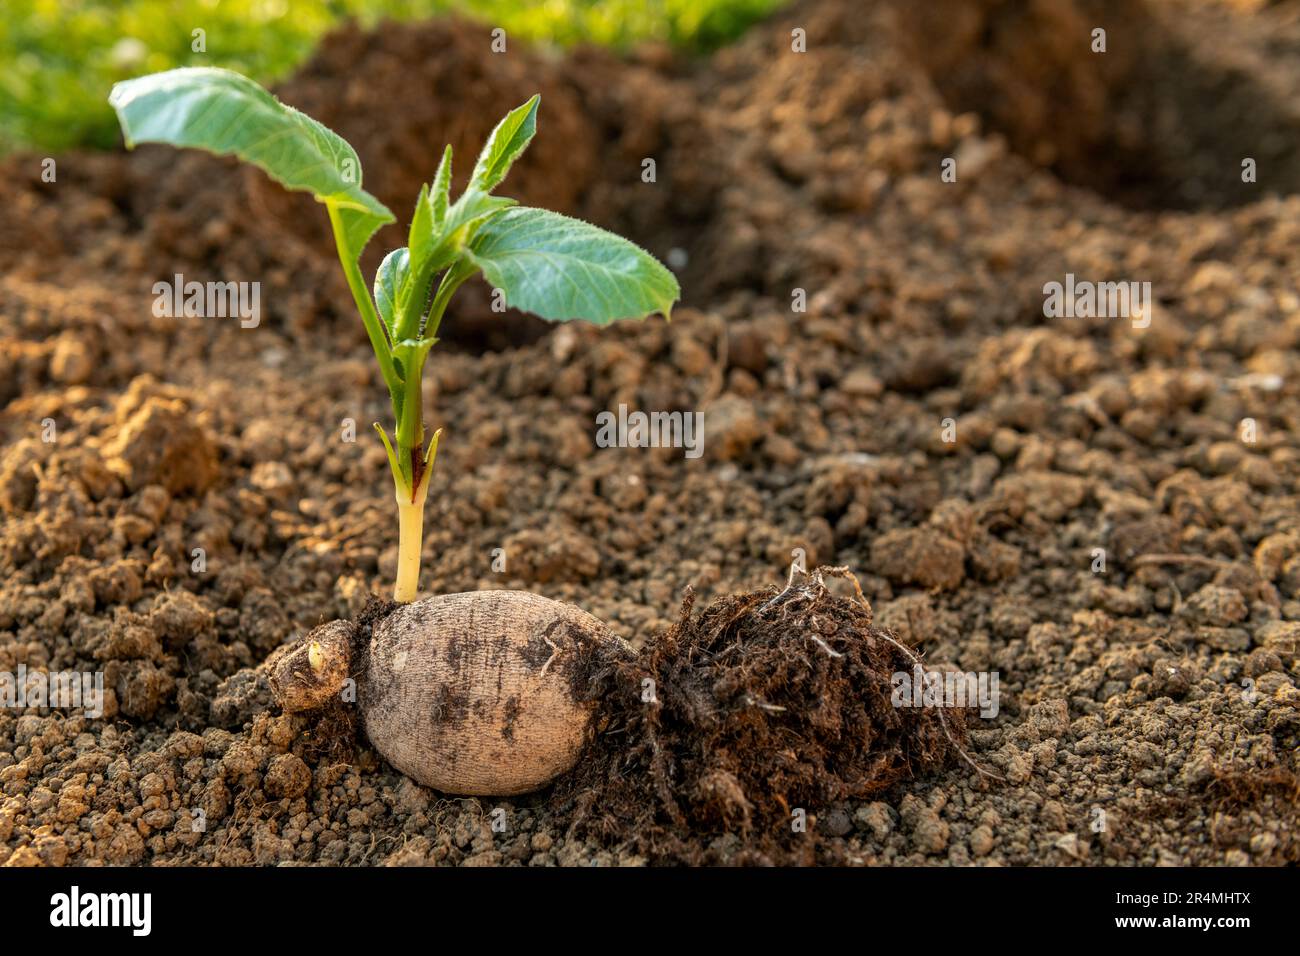 Planting dahlia plants in a flowerbed. Presprouted dahlia tubers in ornamental garden. Stock Photo